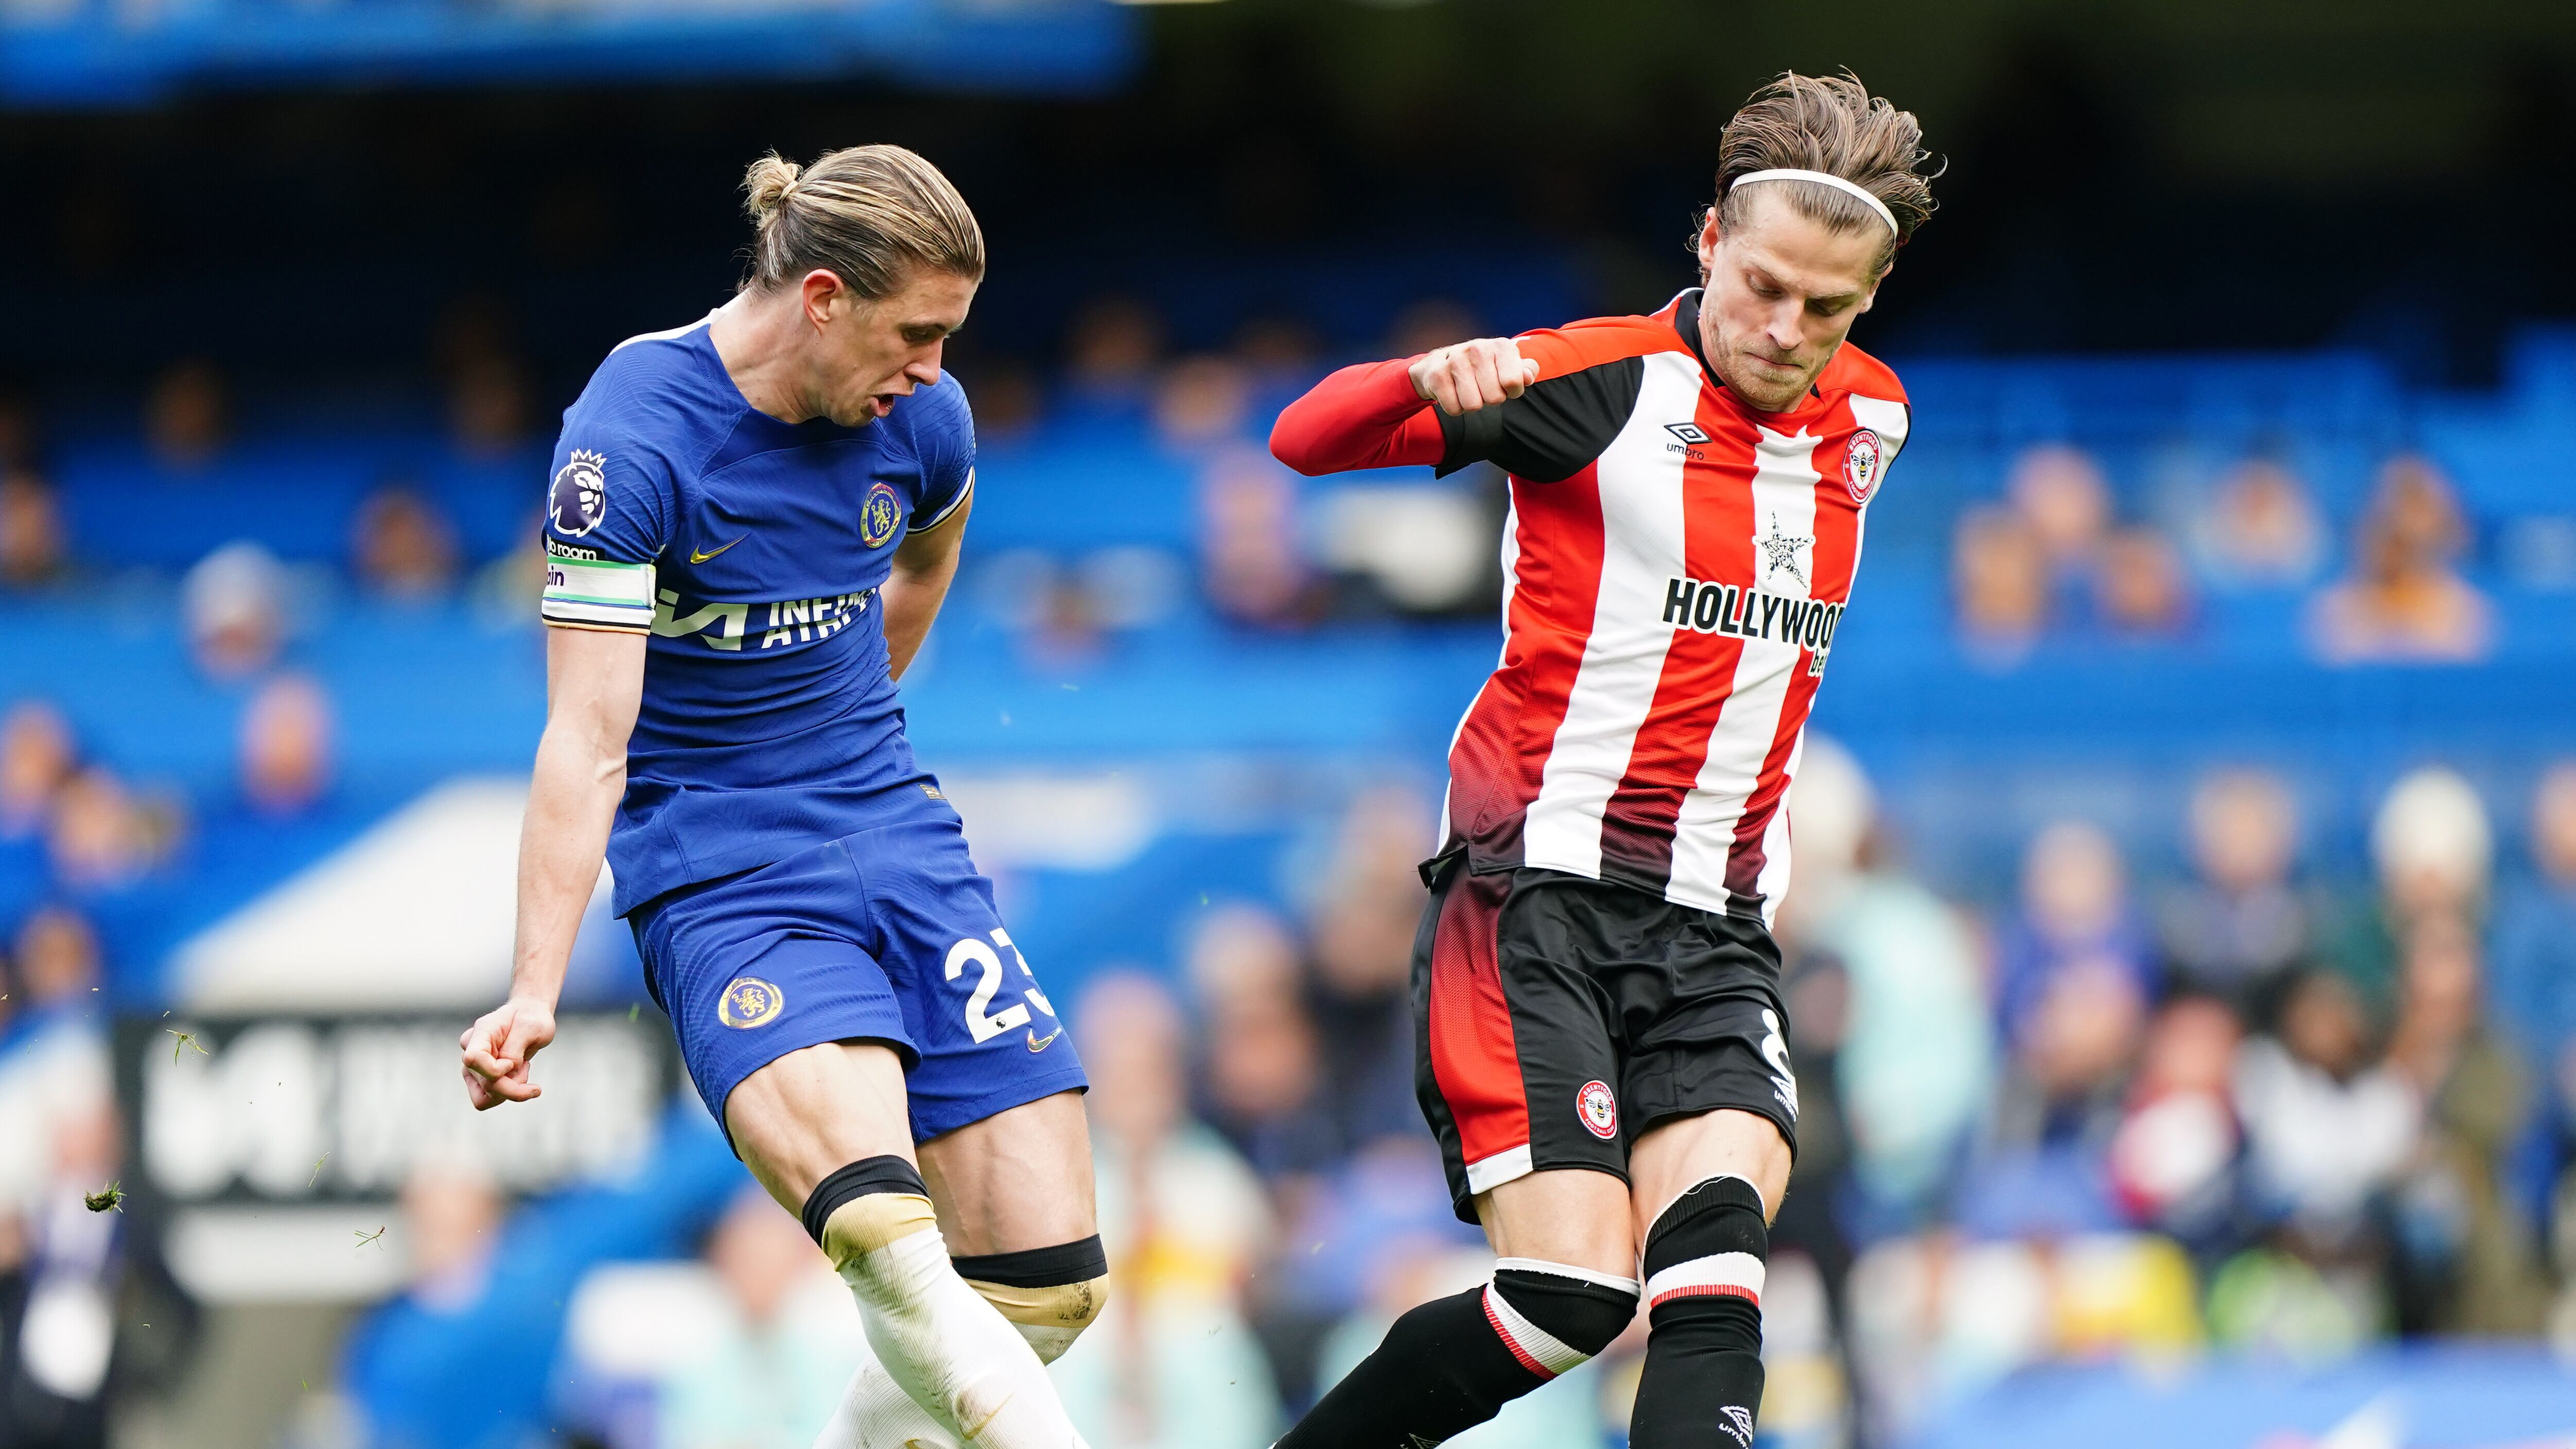 Chelsea’s Conor Gallagher and Brentford’s Mathias Jensen battle for the ball (Zac Goodwin, PA)